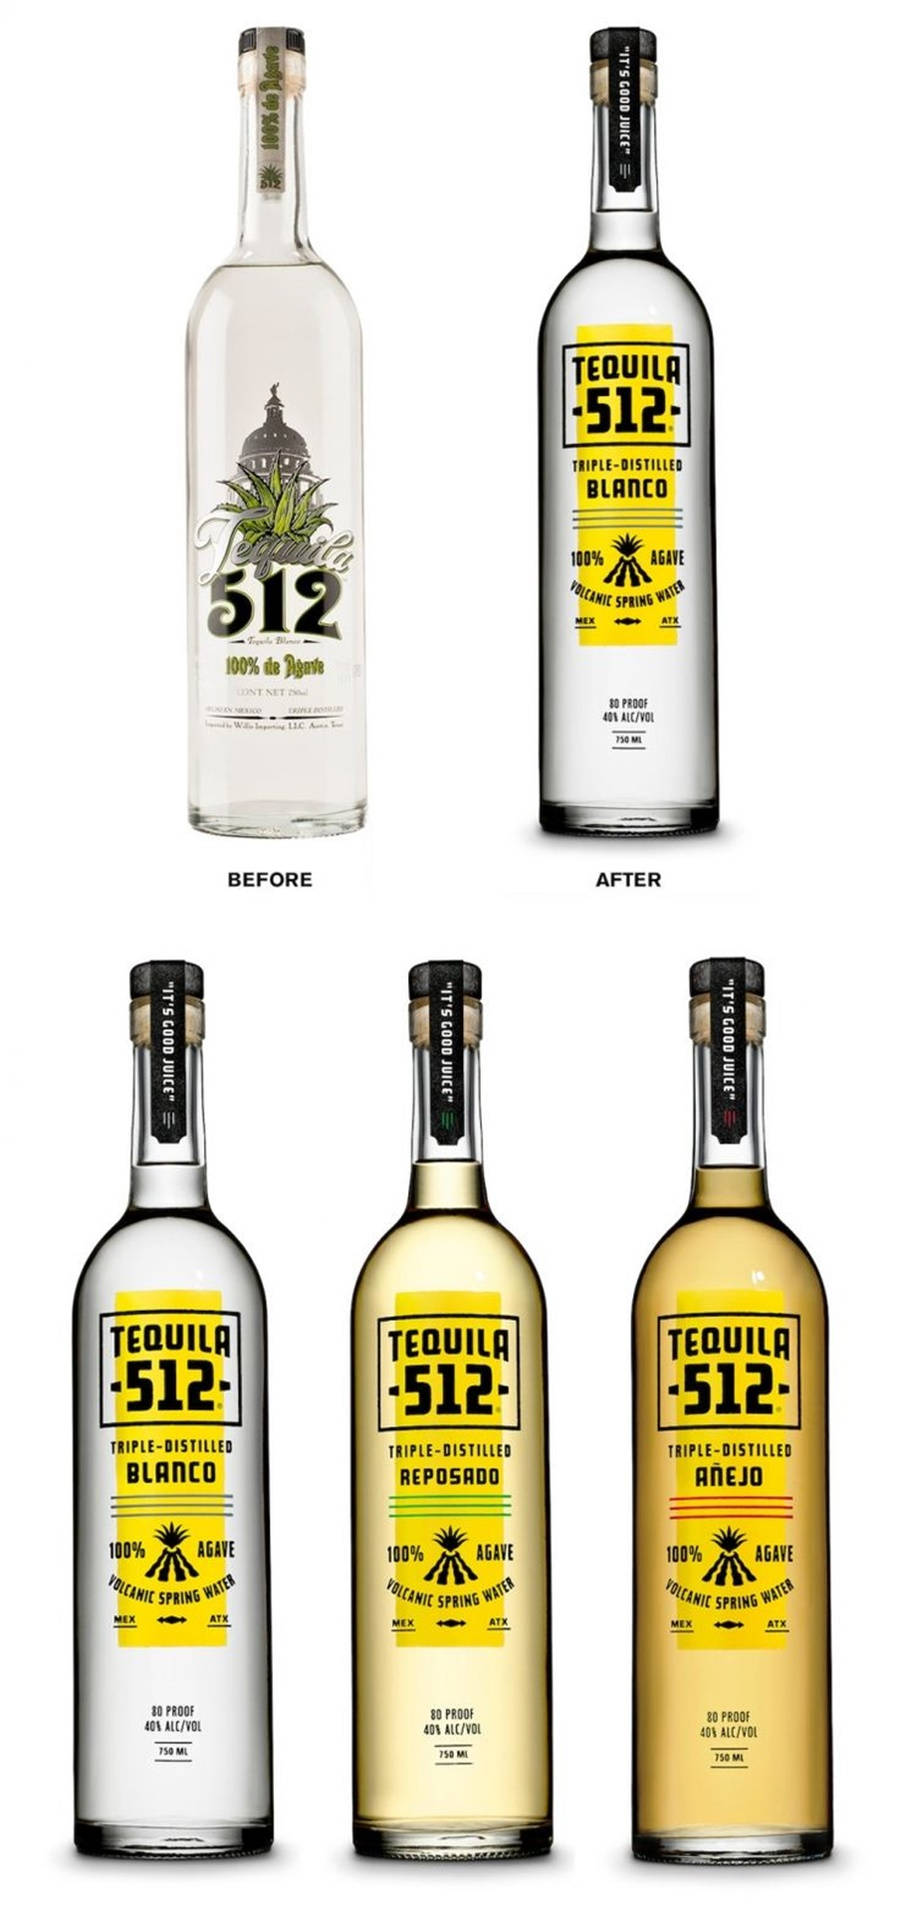 A Diverse Selection of Tequila 512 Bottles Wallpaper